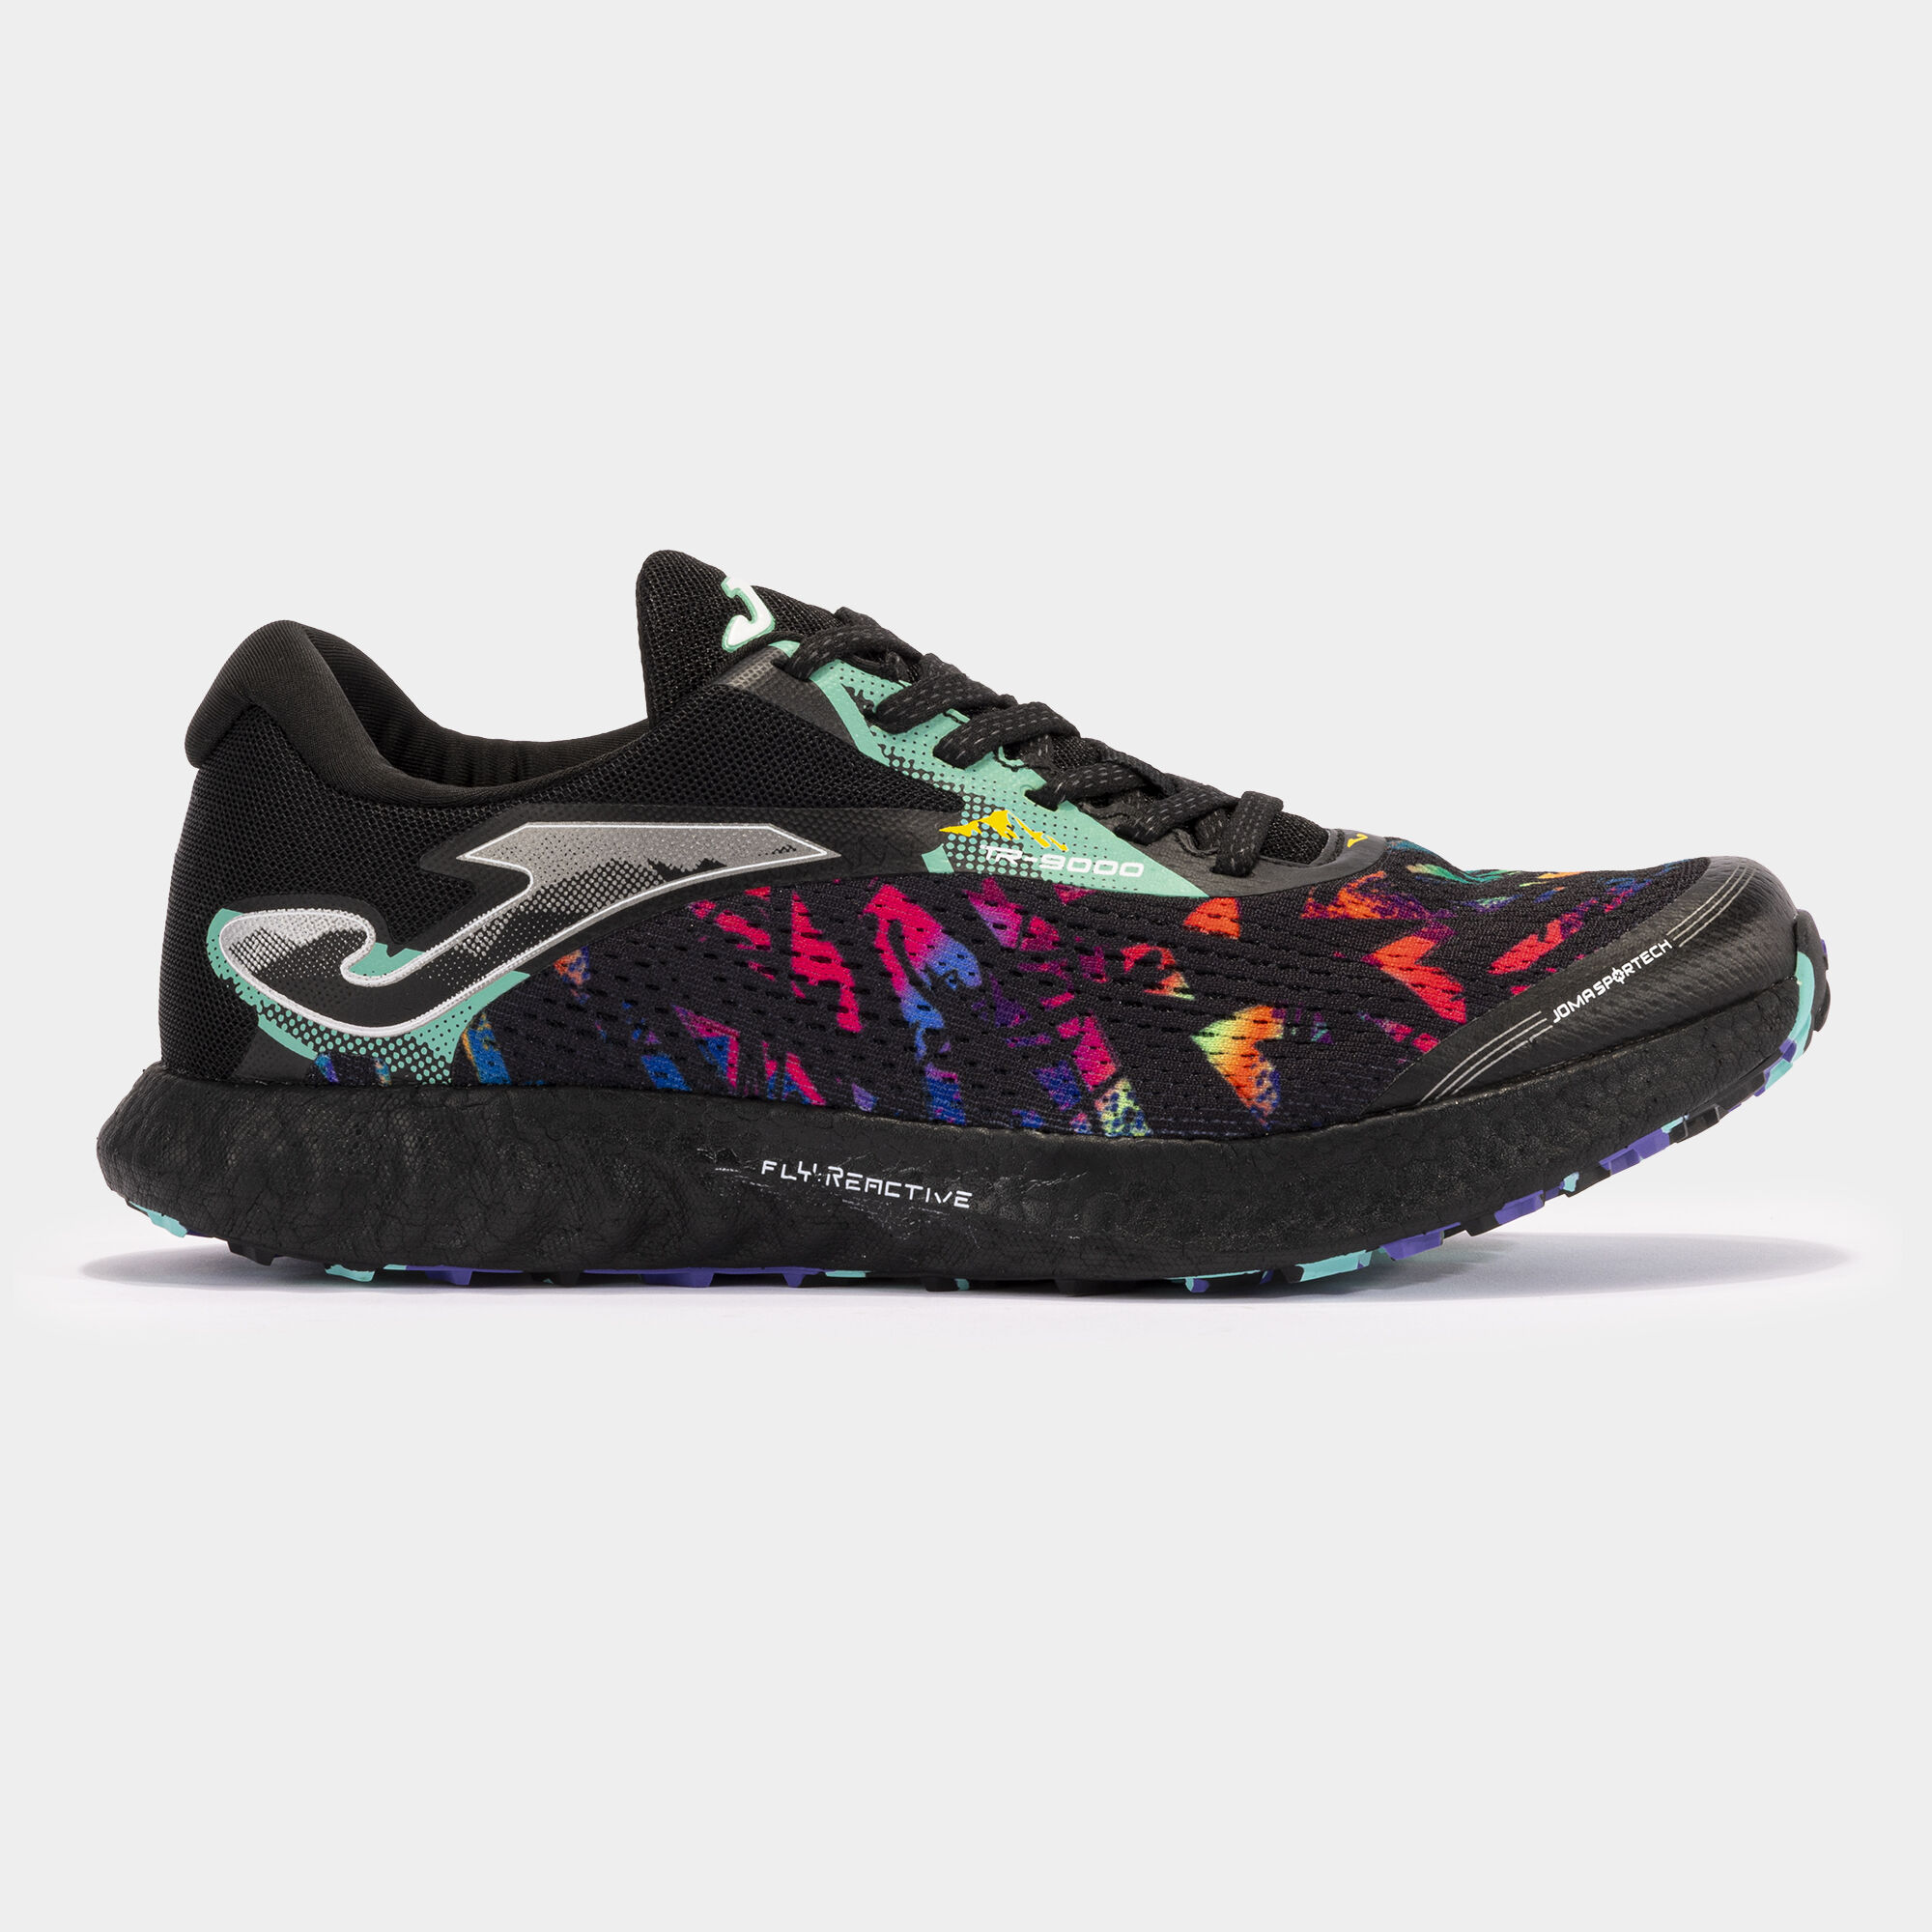 Chaussures trail running Tr-9000 24 unisexe noir multicolore